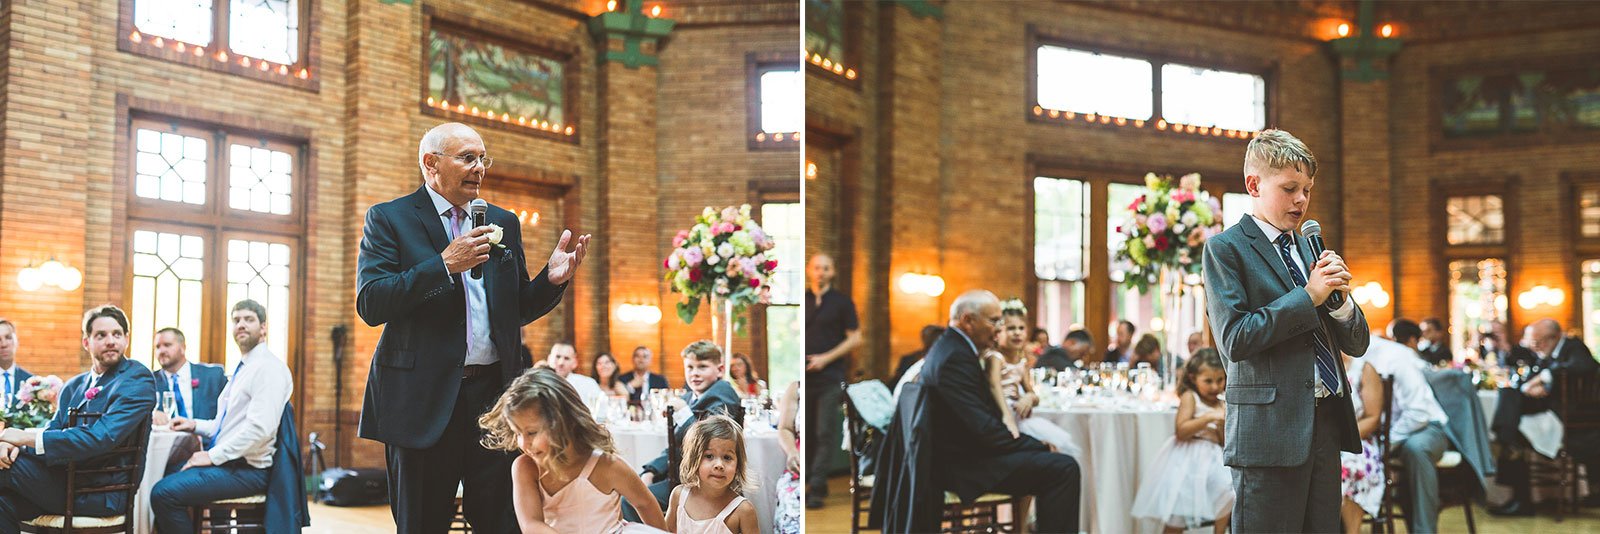 57 father of the bride speech at chicago wedding - Natalie + Alan // Chicago Wedding Photographer at Cafe Brauer